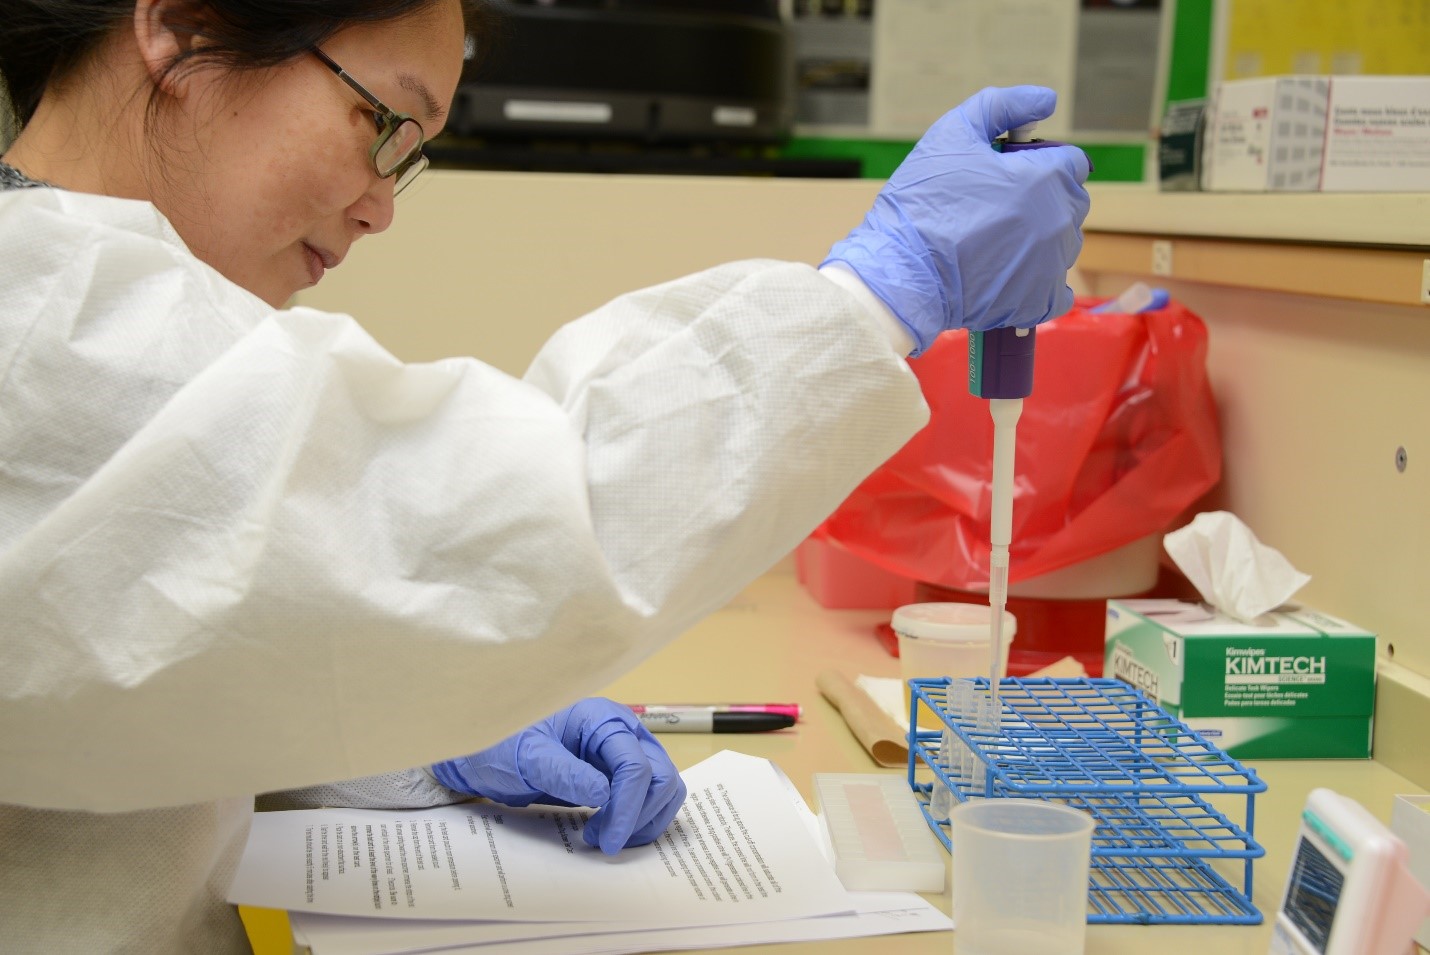  A Southwest student examines specimens during a Medical Laboratory Technician class.